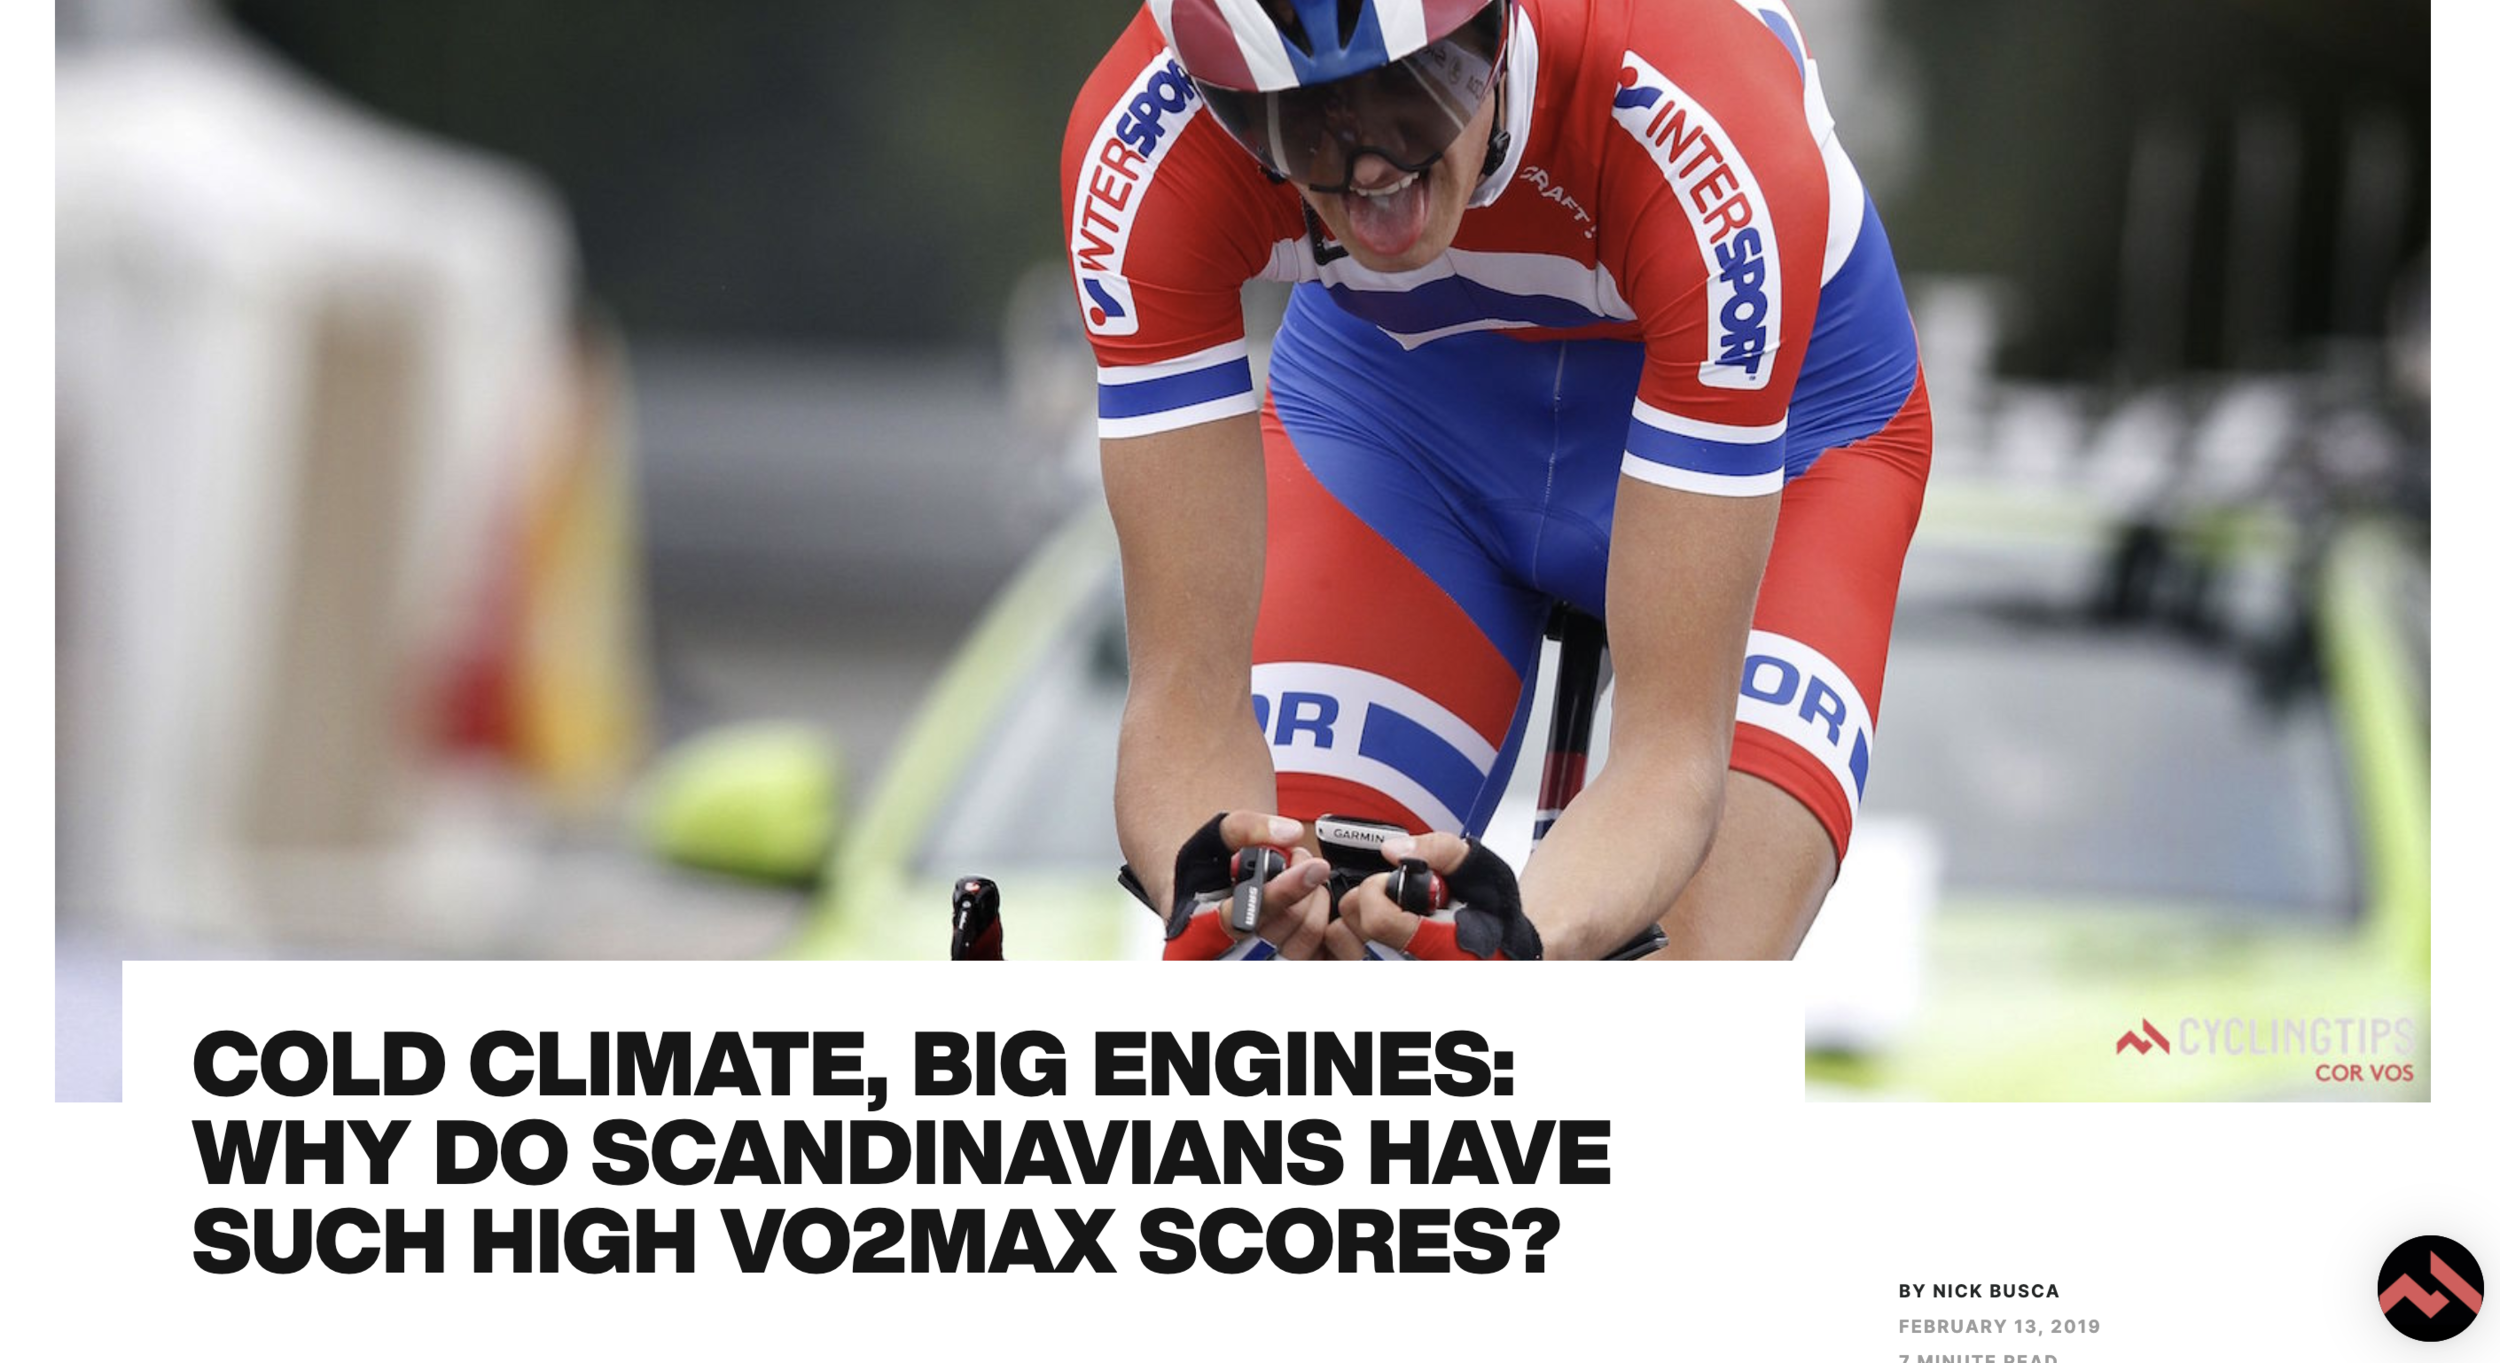 COLD CLIMATE, BIG ENGINES: WHY DO SCANDINAVIANS HAVE SUCH HIGH VO2MAX SCORES?